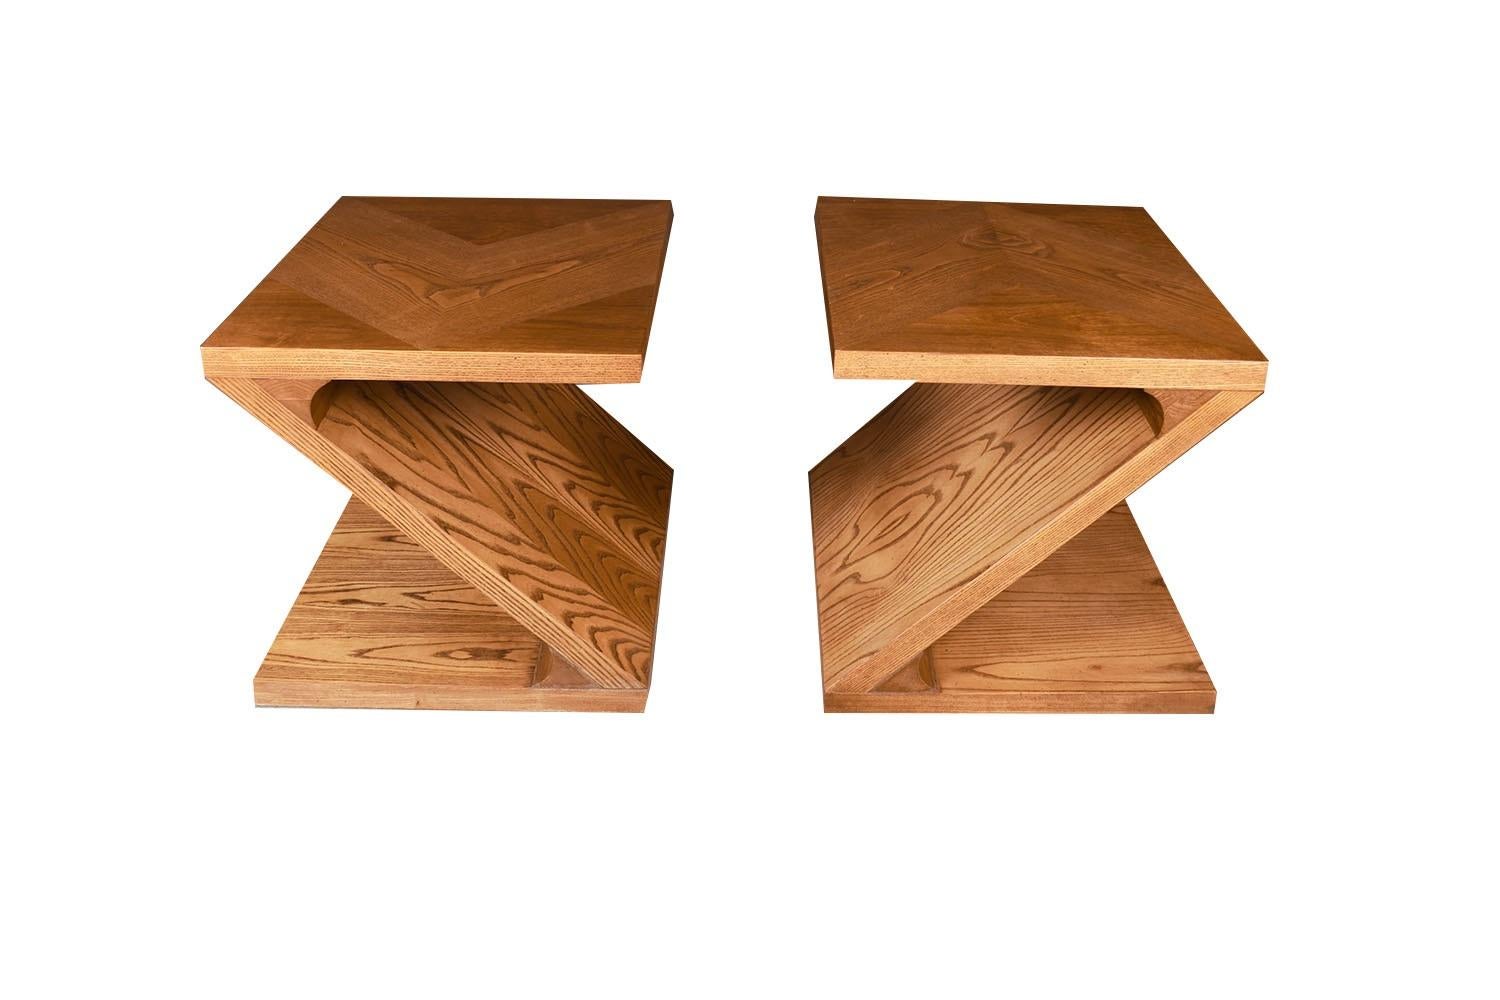 A striking, unique pair of midcentury Modern Z shape end tables or nightstands by Lane Furniture. Multipurpose tables each feature a single piece of graceful z design with beautiful oak marquetry throughout and a thick 1 5/8